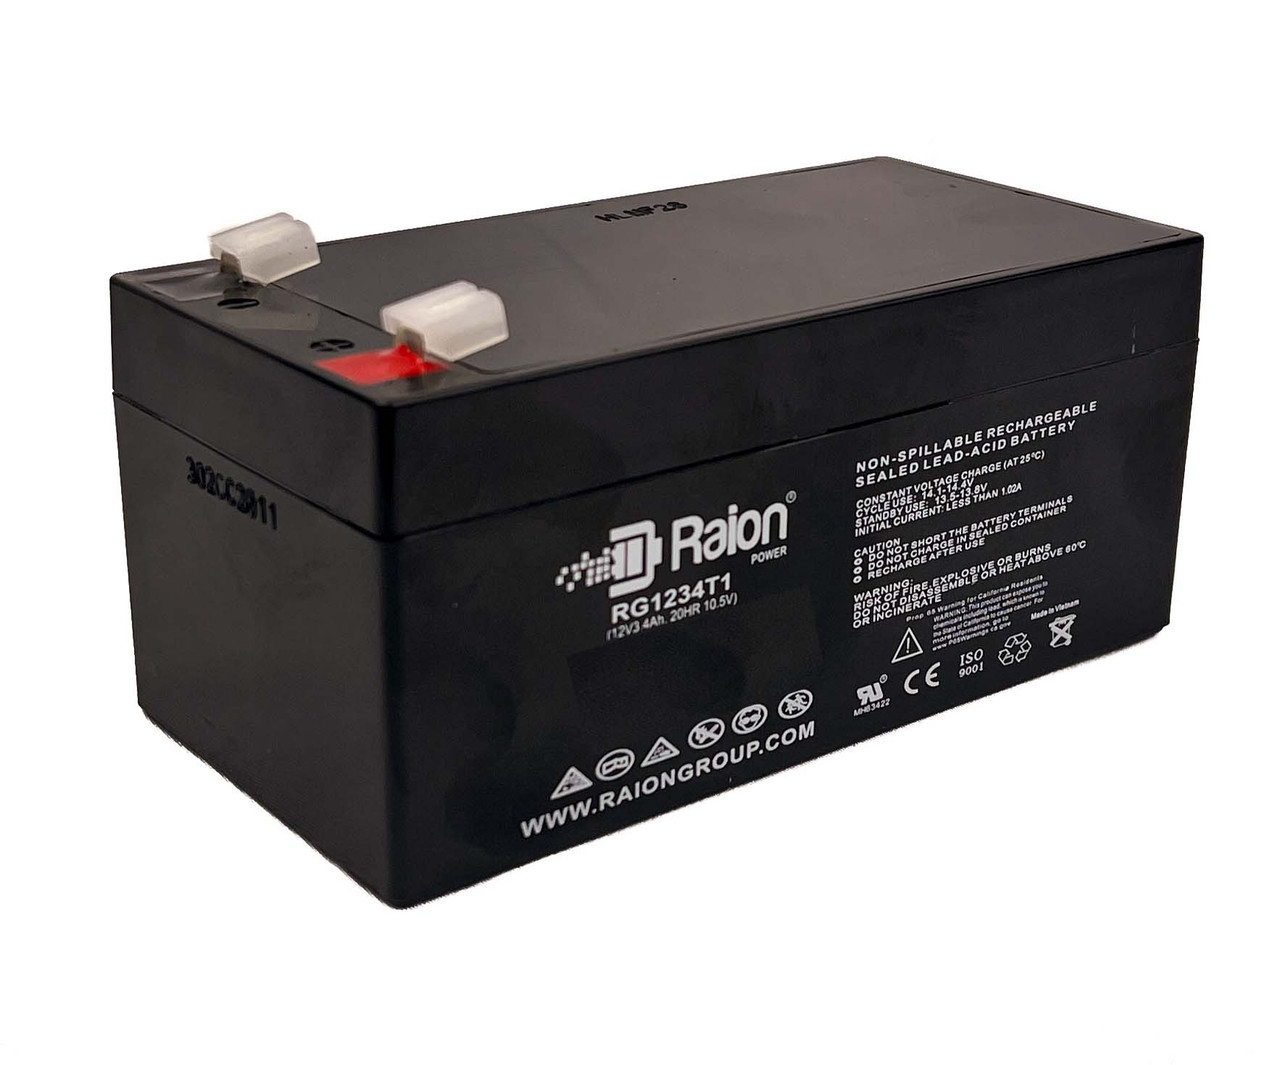 Raion Power 12V 3.4Ah Non-Spillable Replacement Battery for Cellpower CP 3.2-12